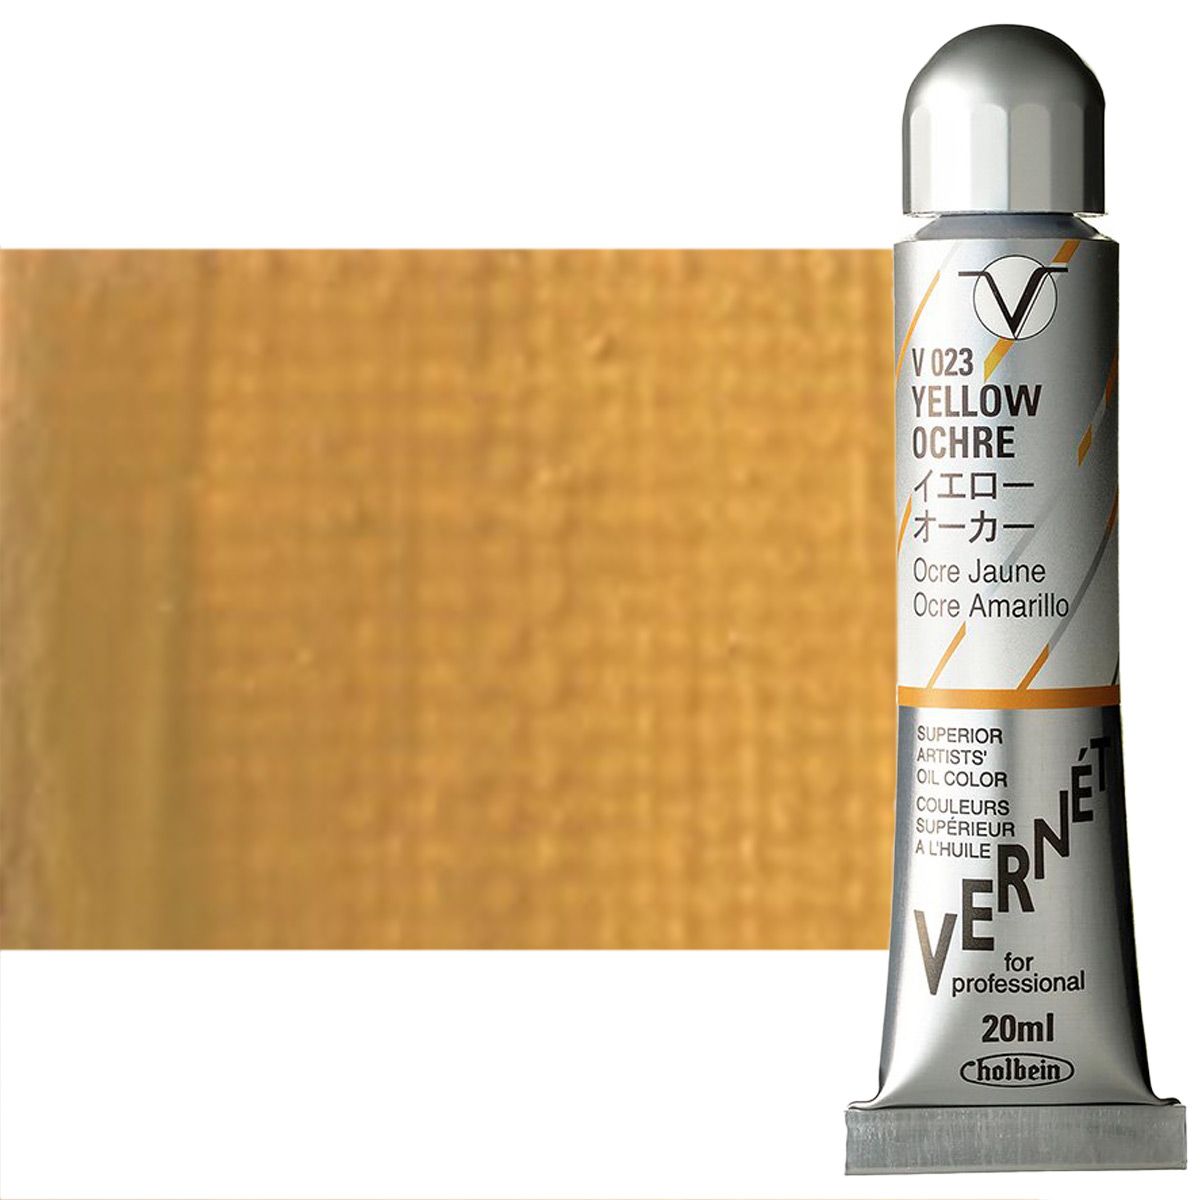 Holbein Vern?t Oil Color 20 ml Tube - Yellow Ochre